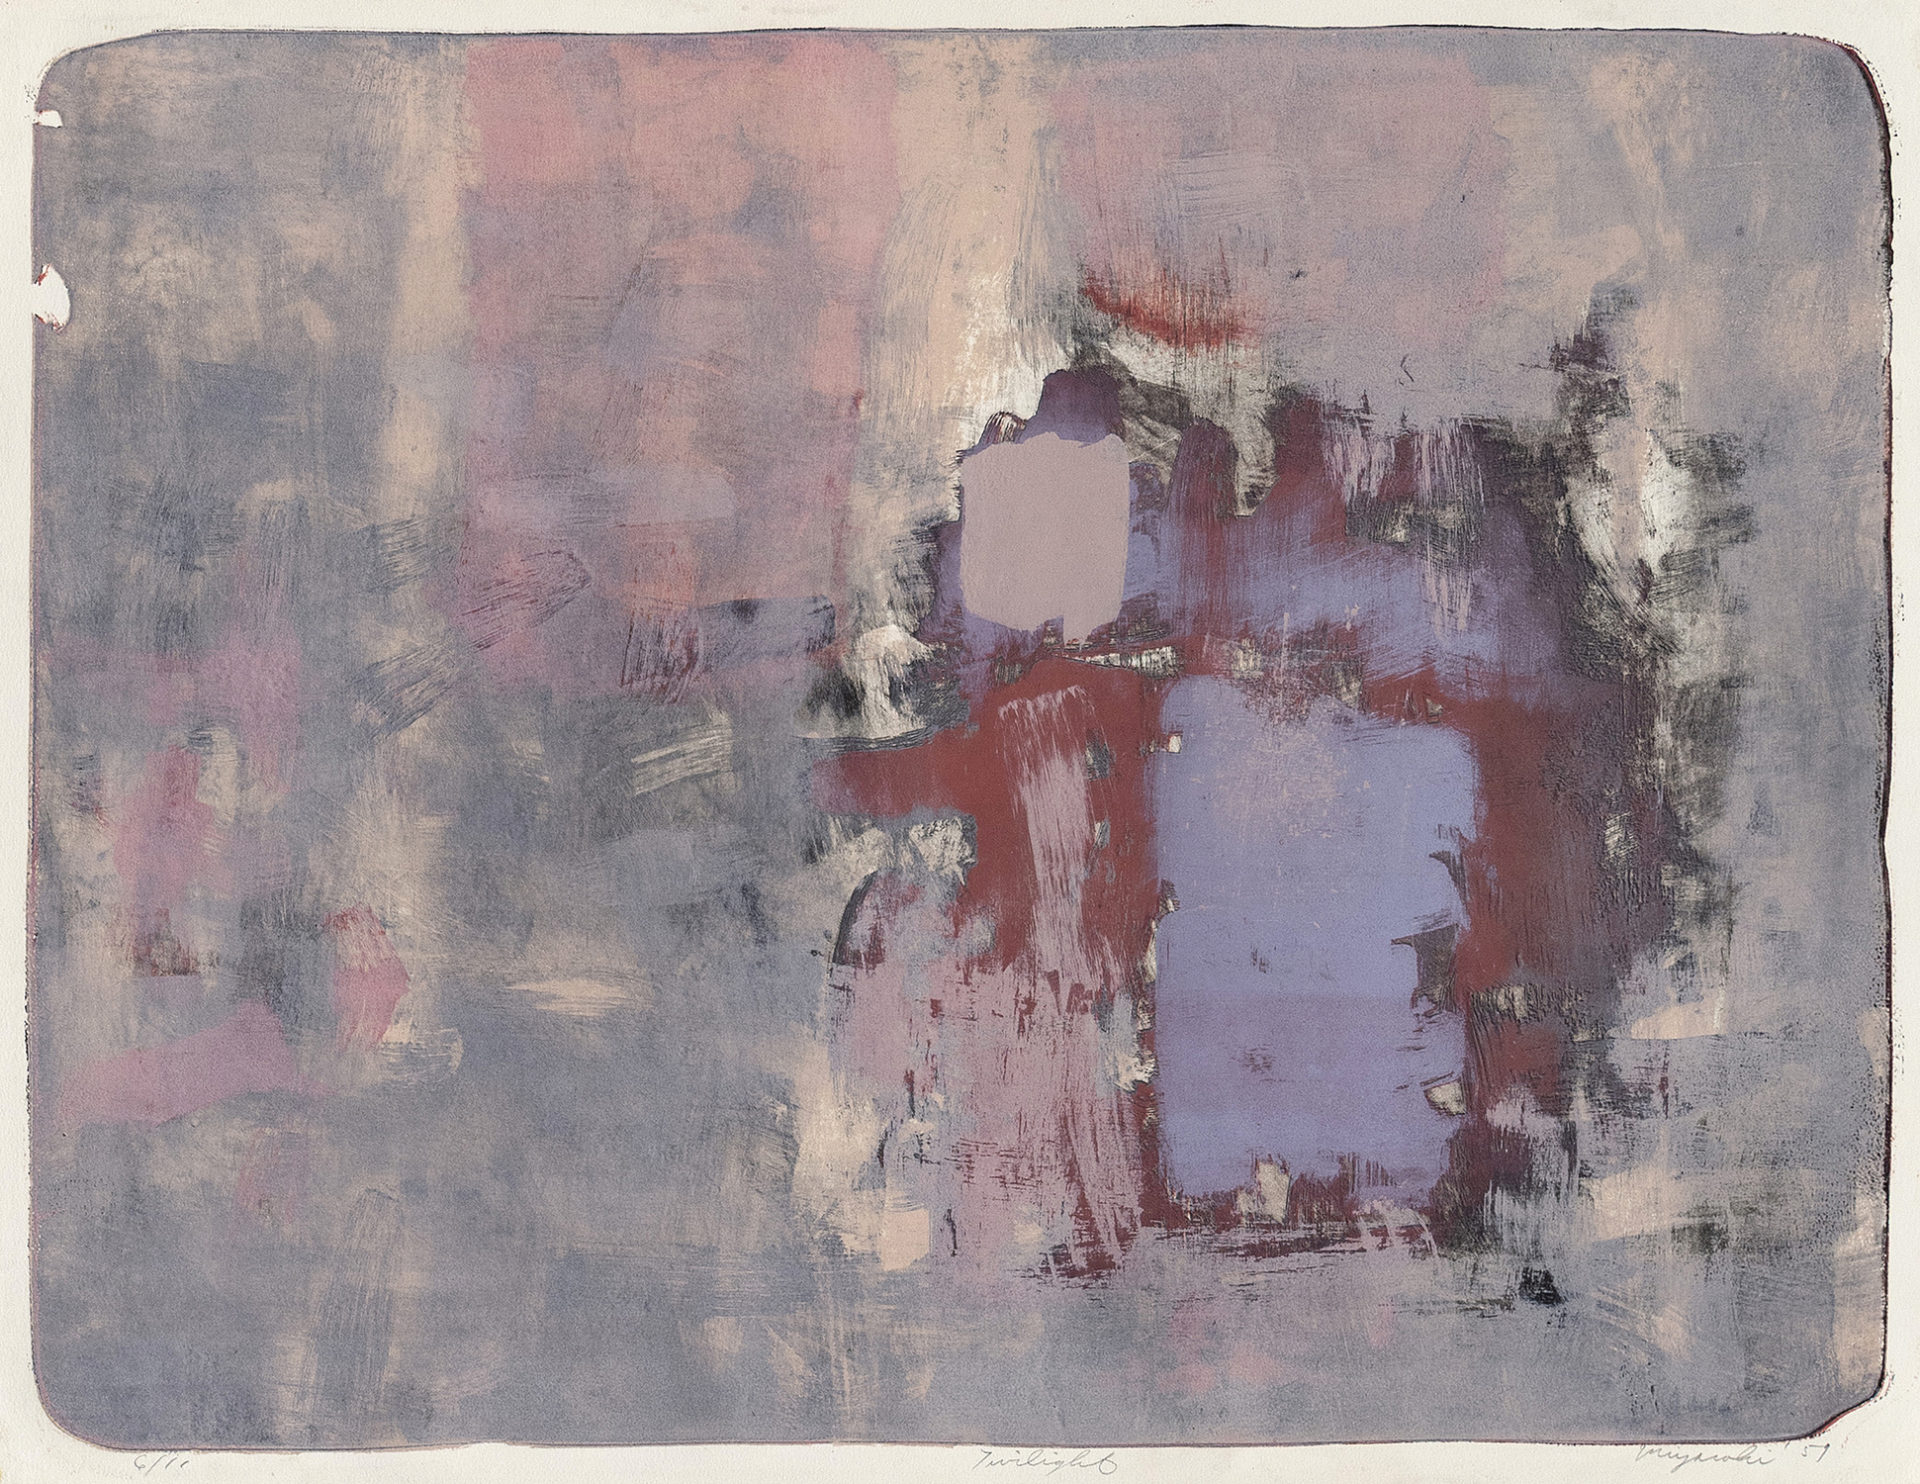 Twilight, 1959, Lithograph, 20 1/8 x 26 1/8 inches (51.1 x 66.4 cm), Edition of 11